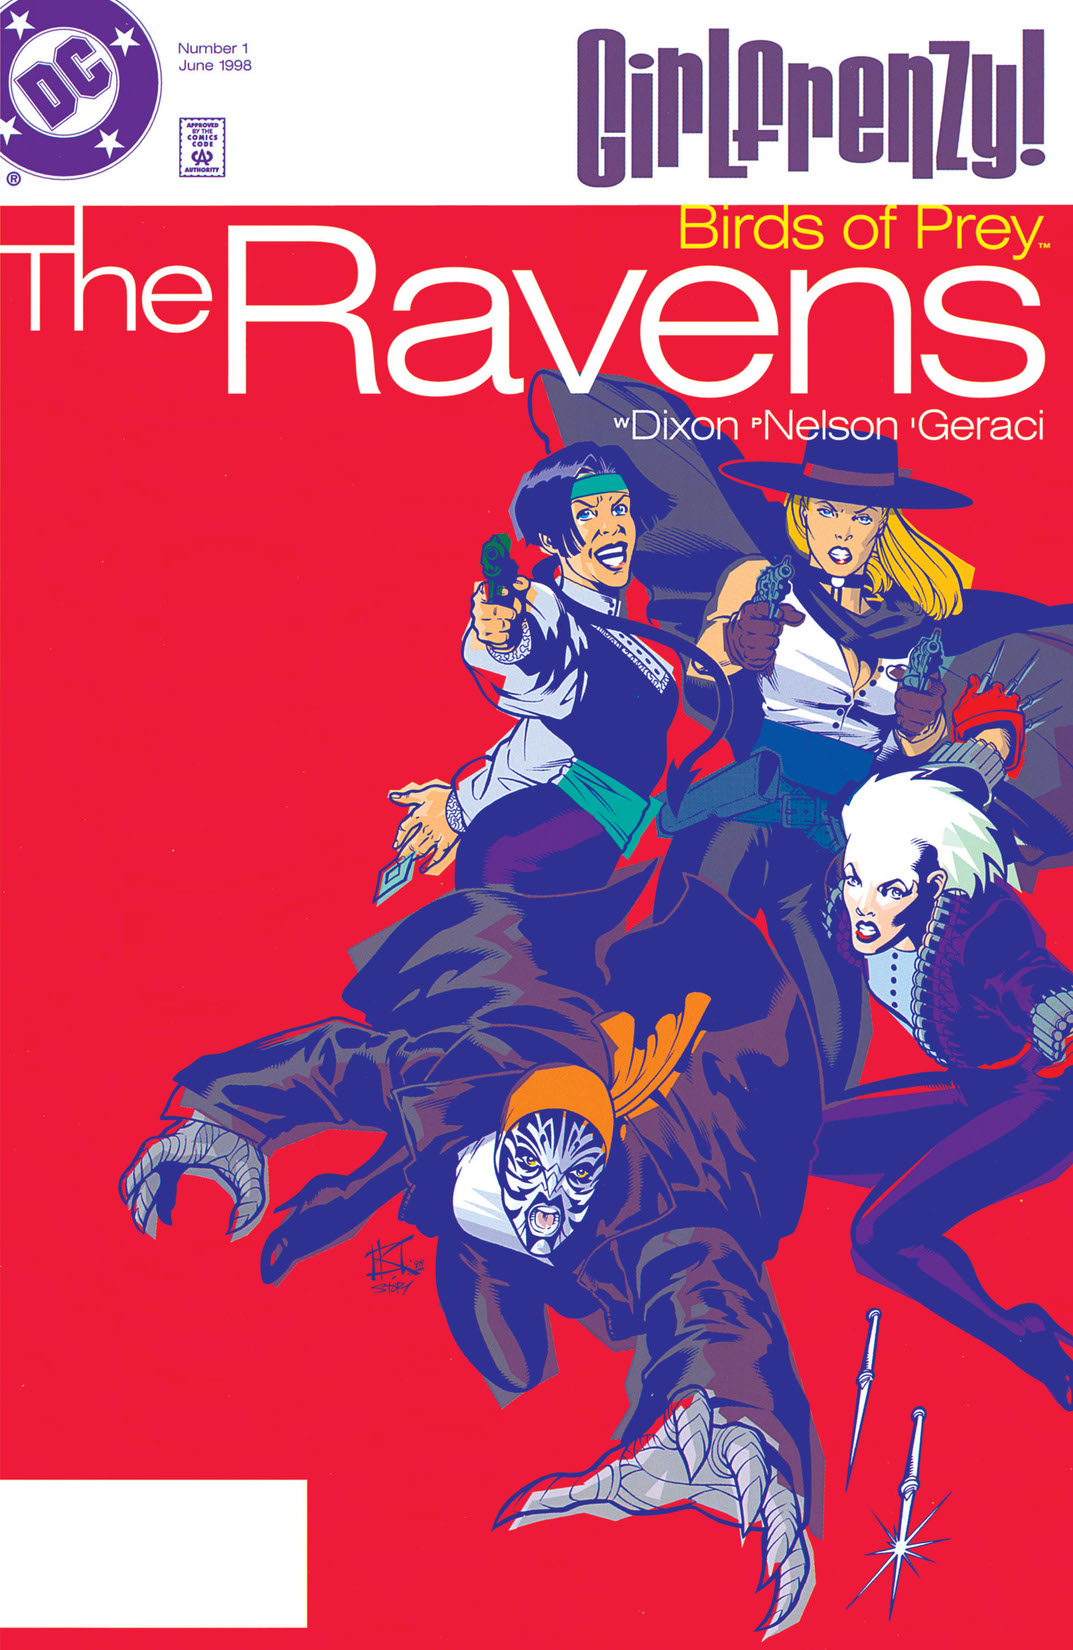 Birds of Prey: The Ravens (1998-) #1 preview images